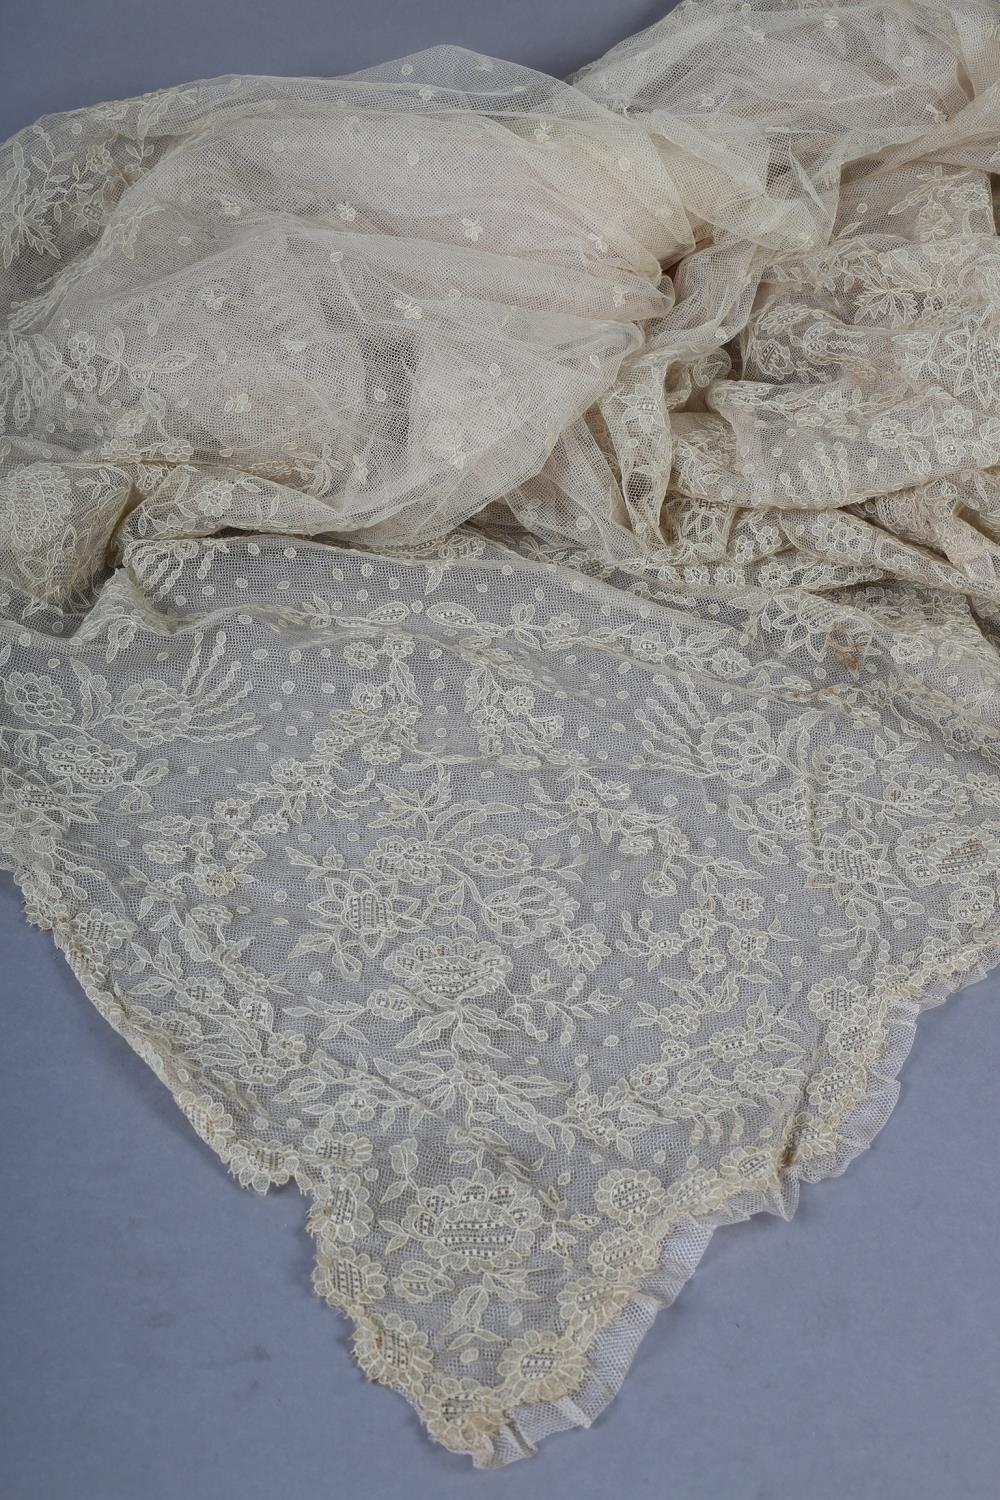 A very fine Limerick wedding veil, 19th century, with detailed fillings, floral design, backed in